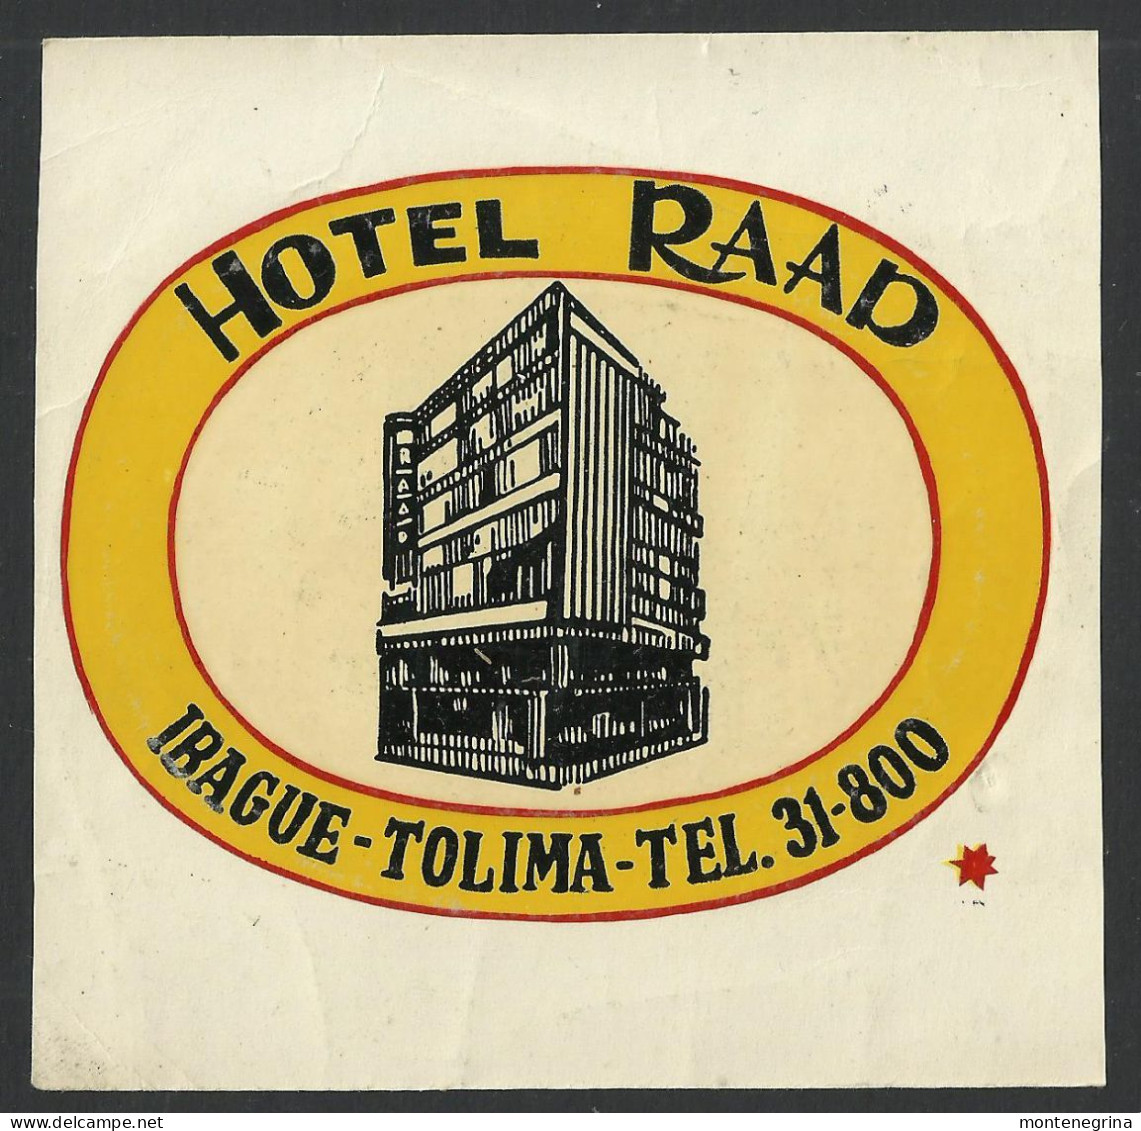 COLOMBIA  IBAGUE - Hotel RAAD -  Luggage Label - 9,5 X 10 Cm (see Sales Conditions) - Hotel Labels